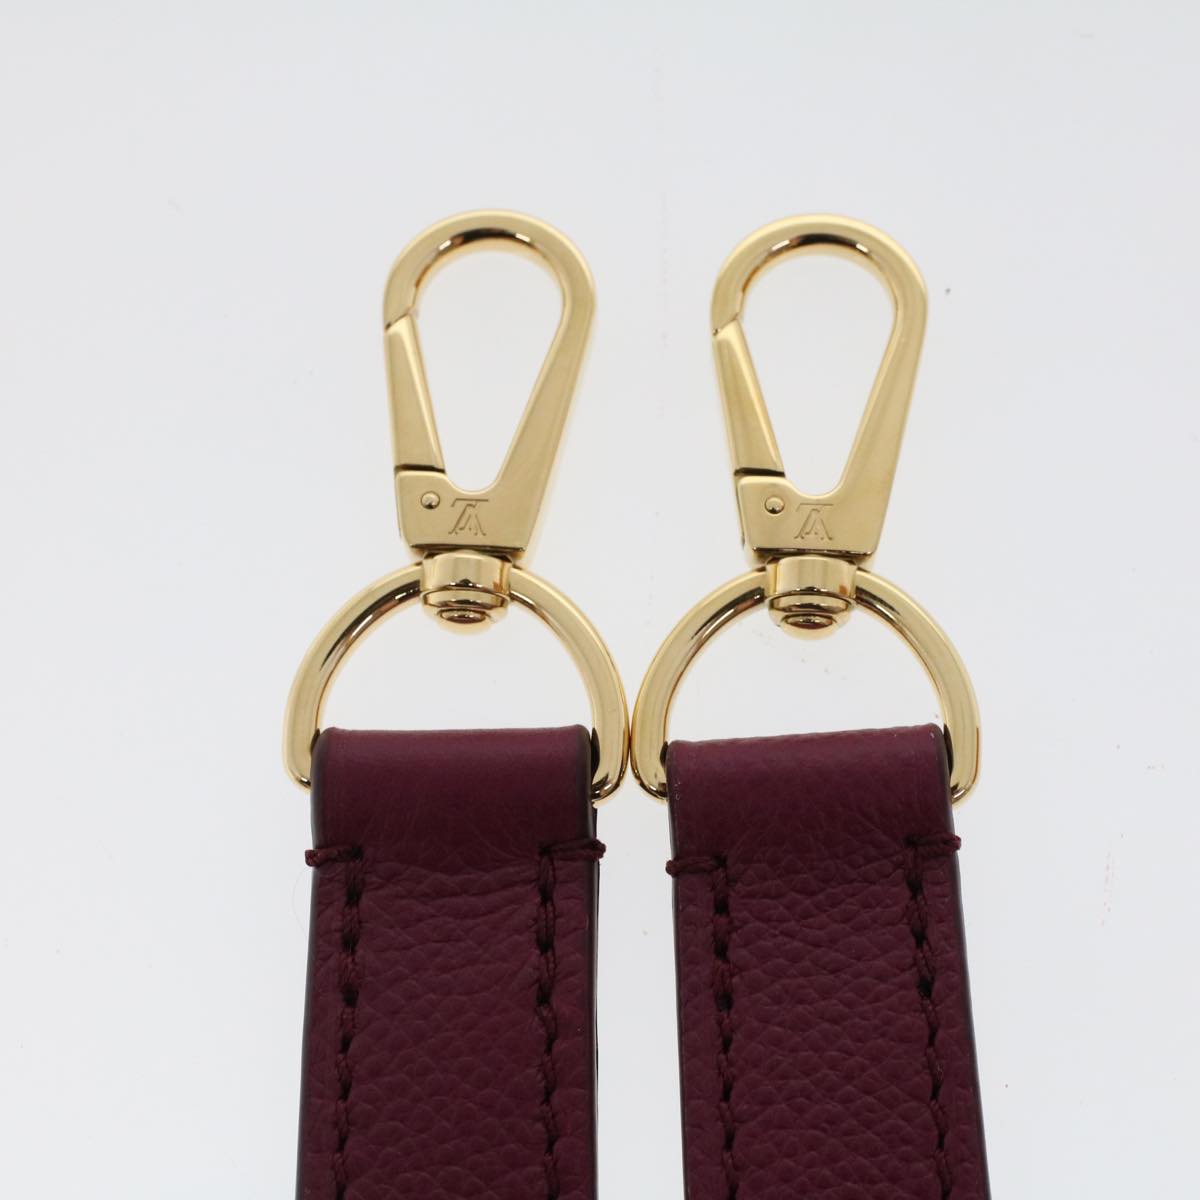 LOUIS VUITTON Shoulder Strap Leather 34.3"" Wine Red LV Auth 42975